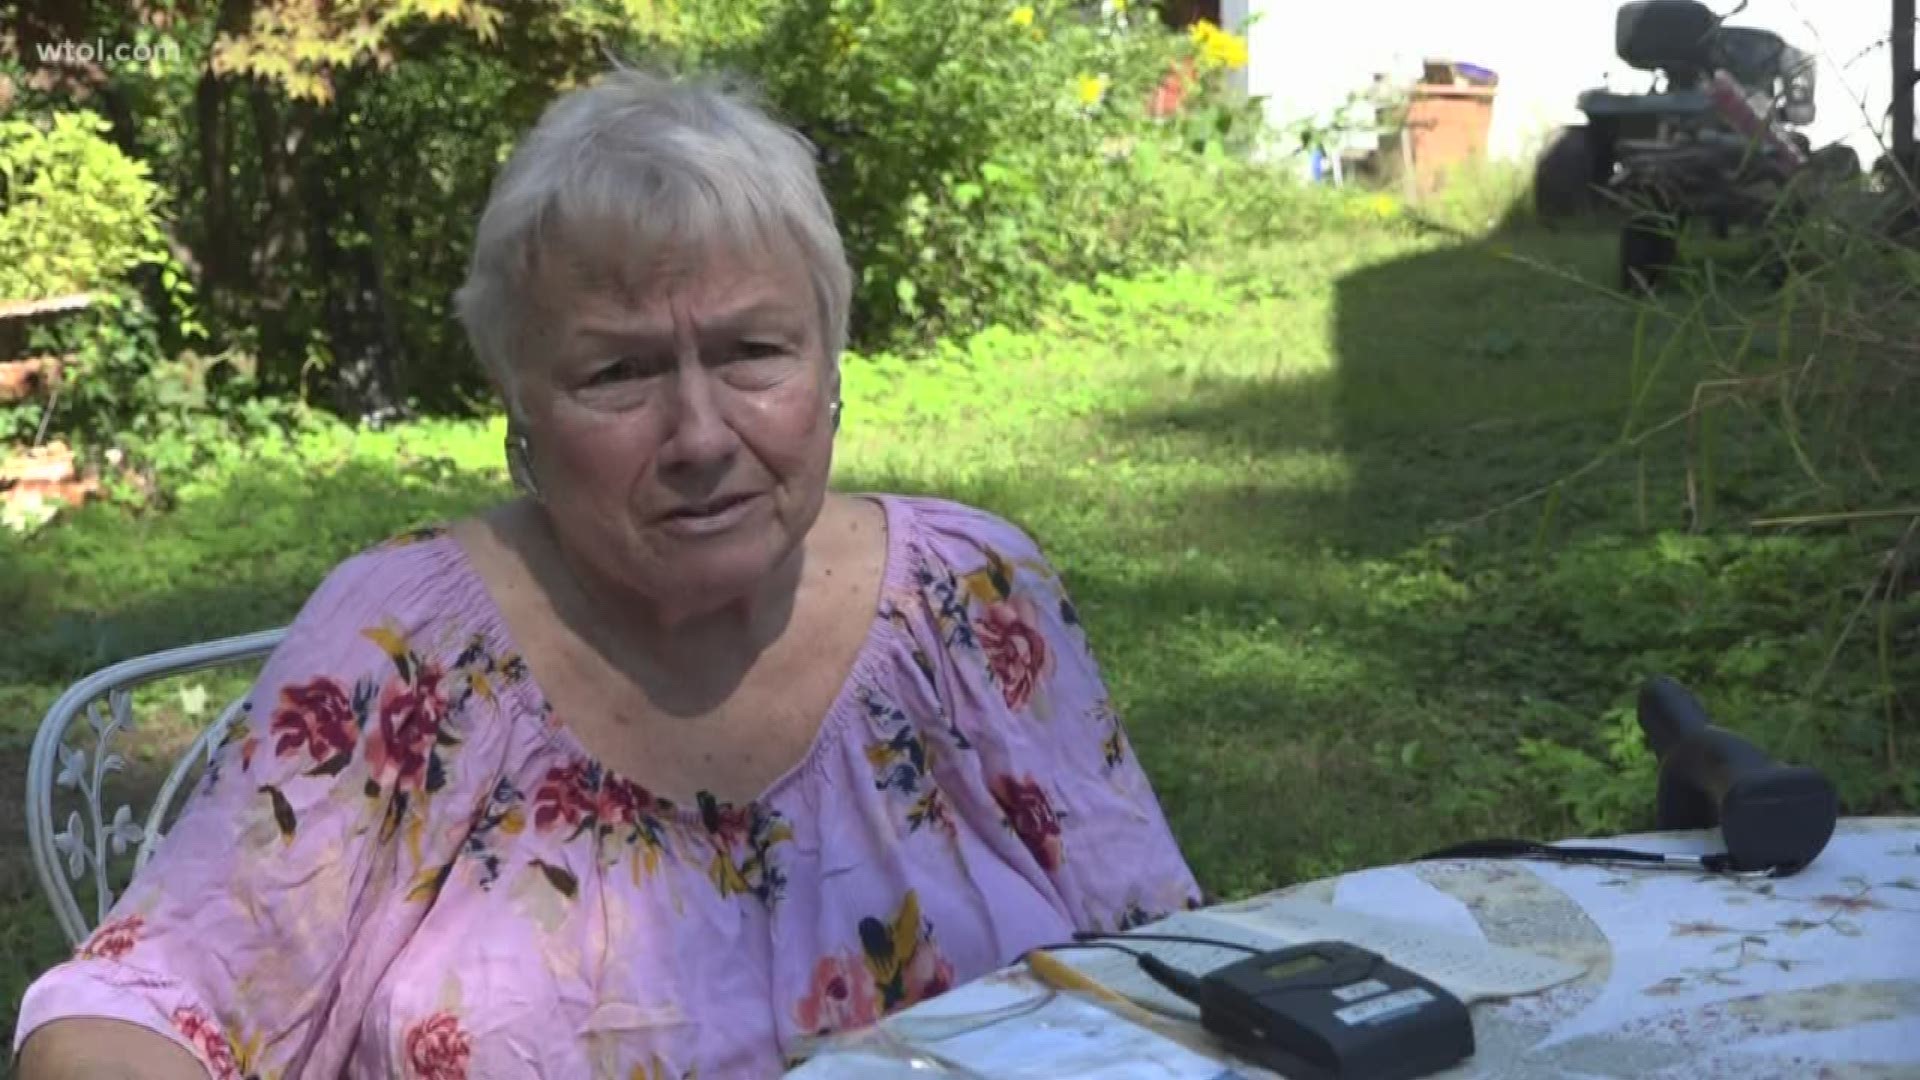 A 76-year-old woman says she has fallen victim to an unknown prowler on her property several times over the last two years.